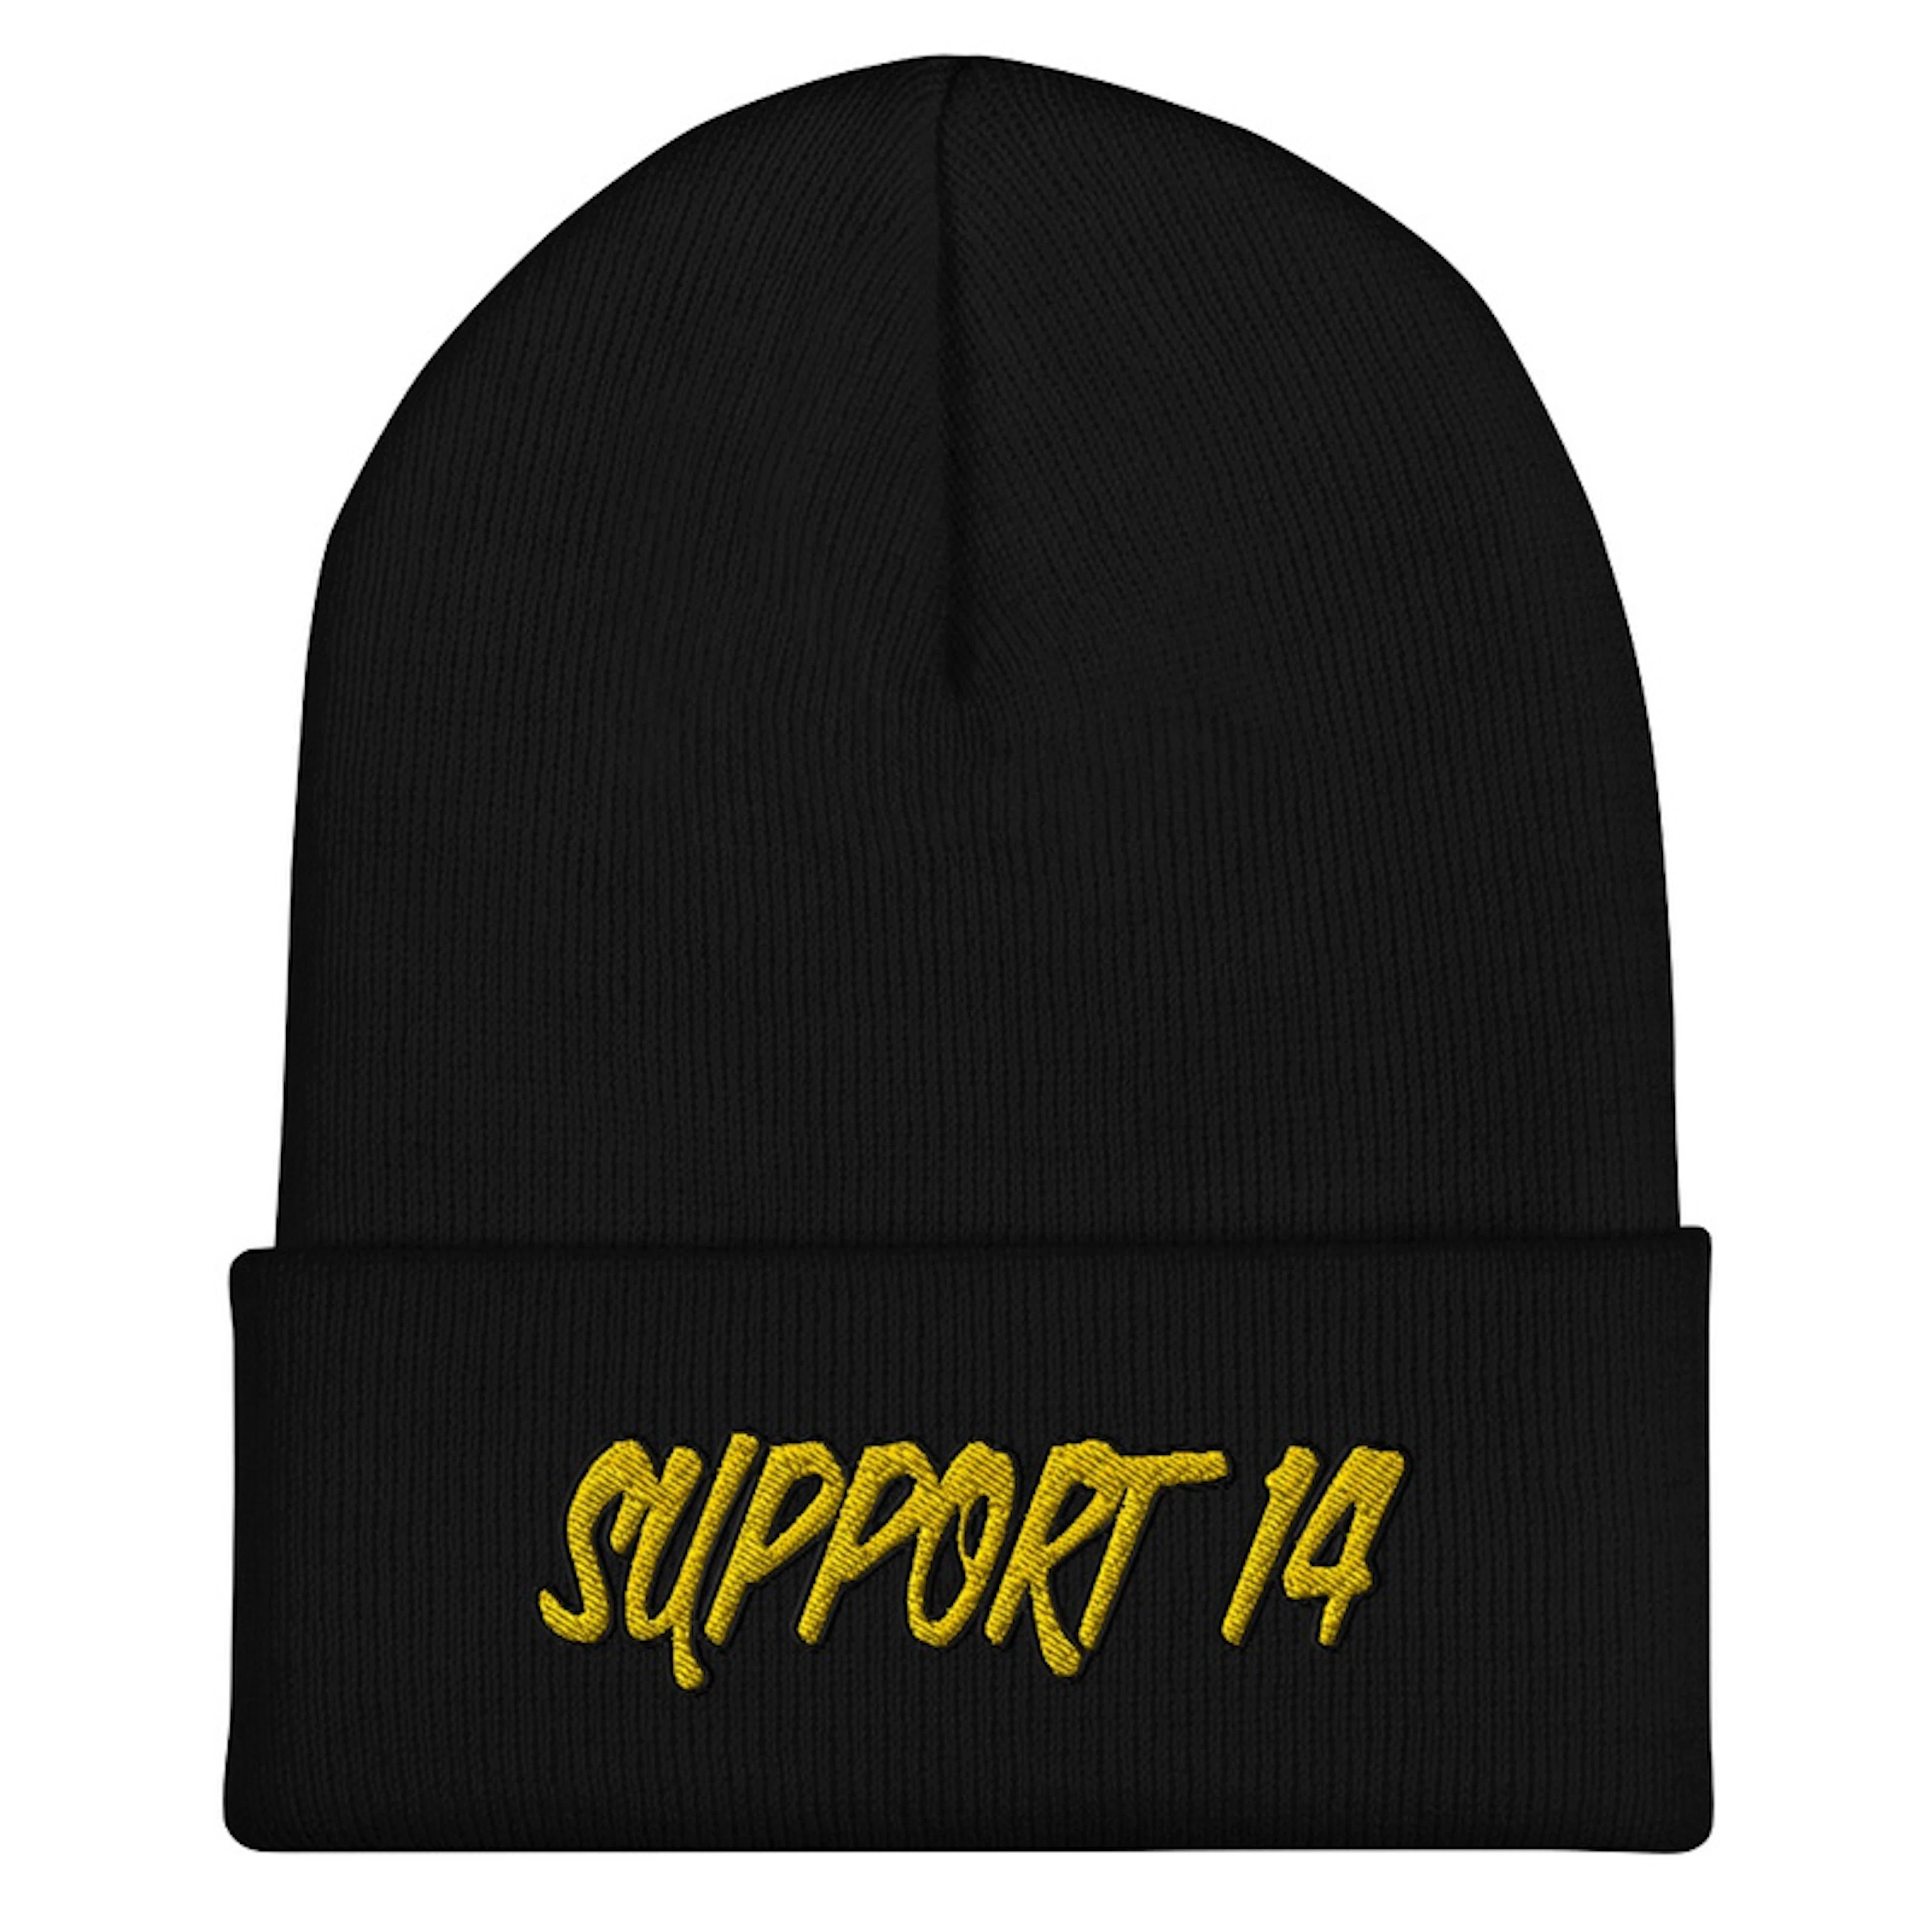 Nuggets Support 14 Embroidered Beanie 